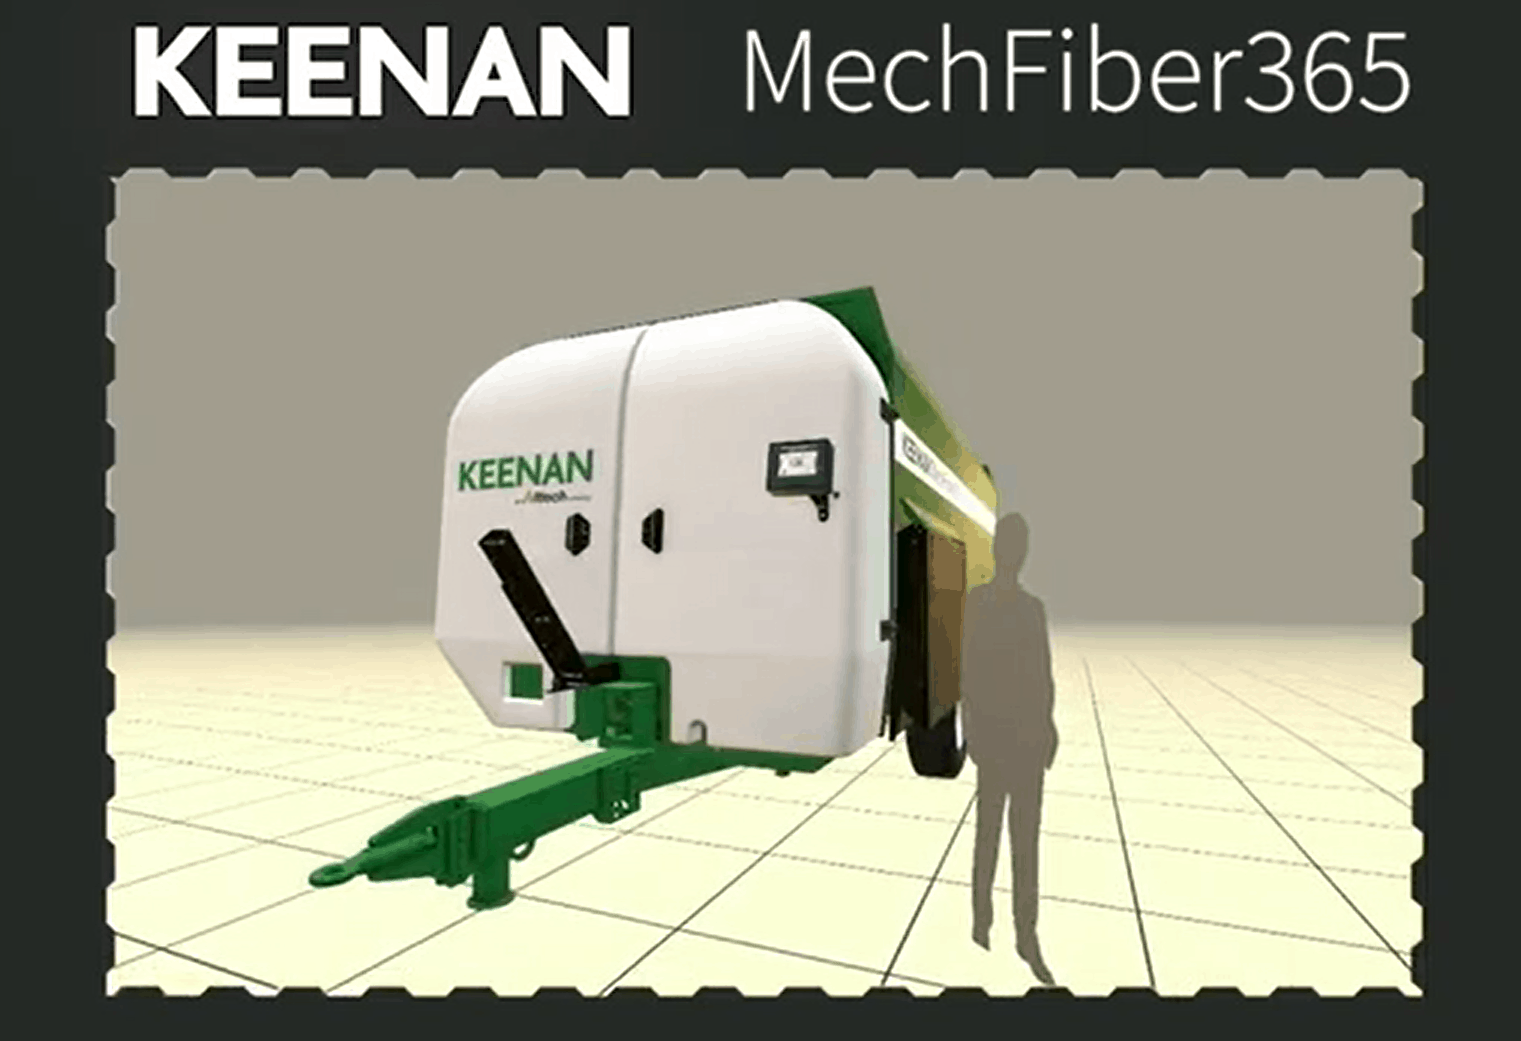 Keenan introduces virtual showroom and suite of supports to help farmers during lockdown